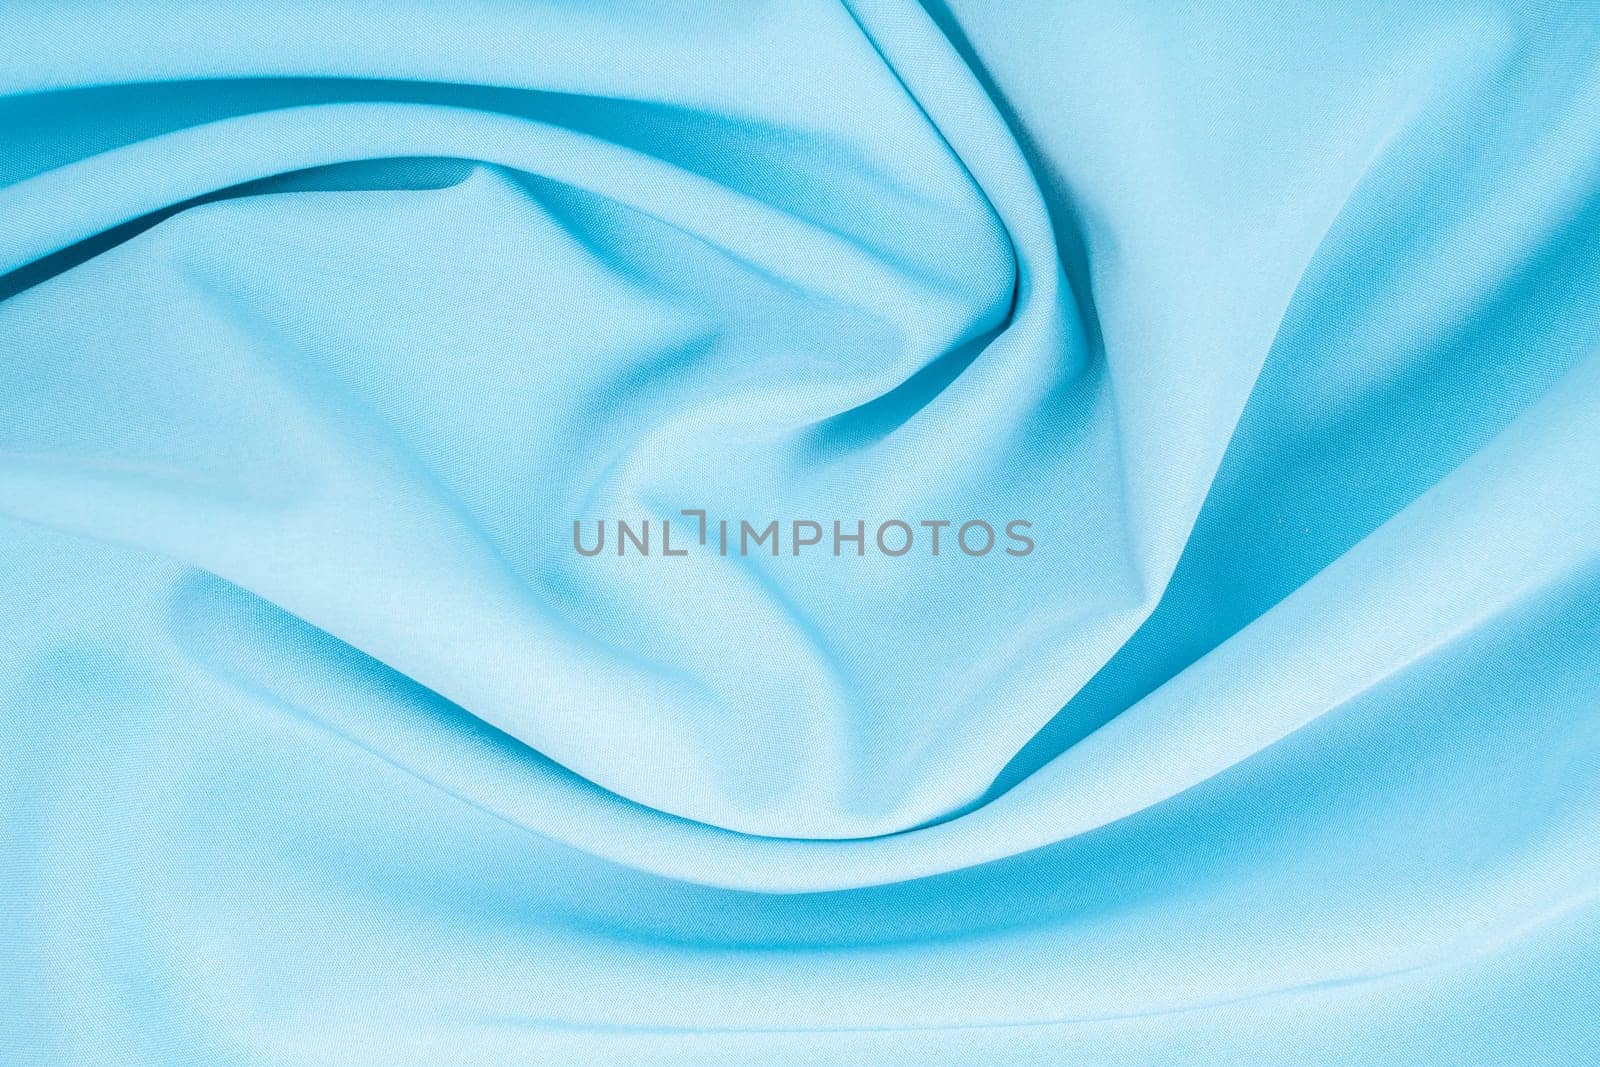 The abstract background luxury light blue cloth texture as background by Gamjai